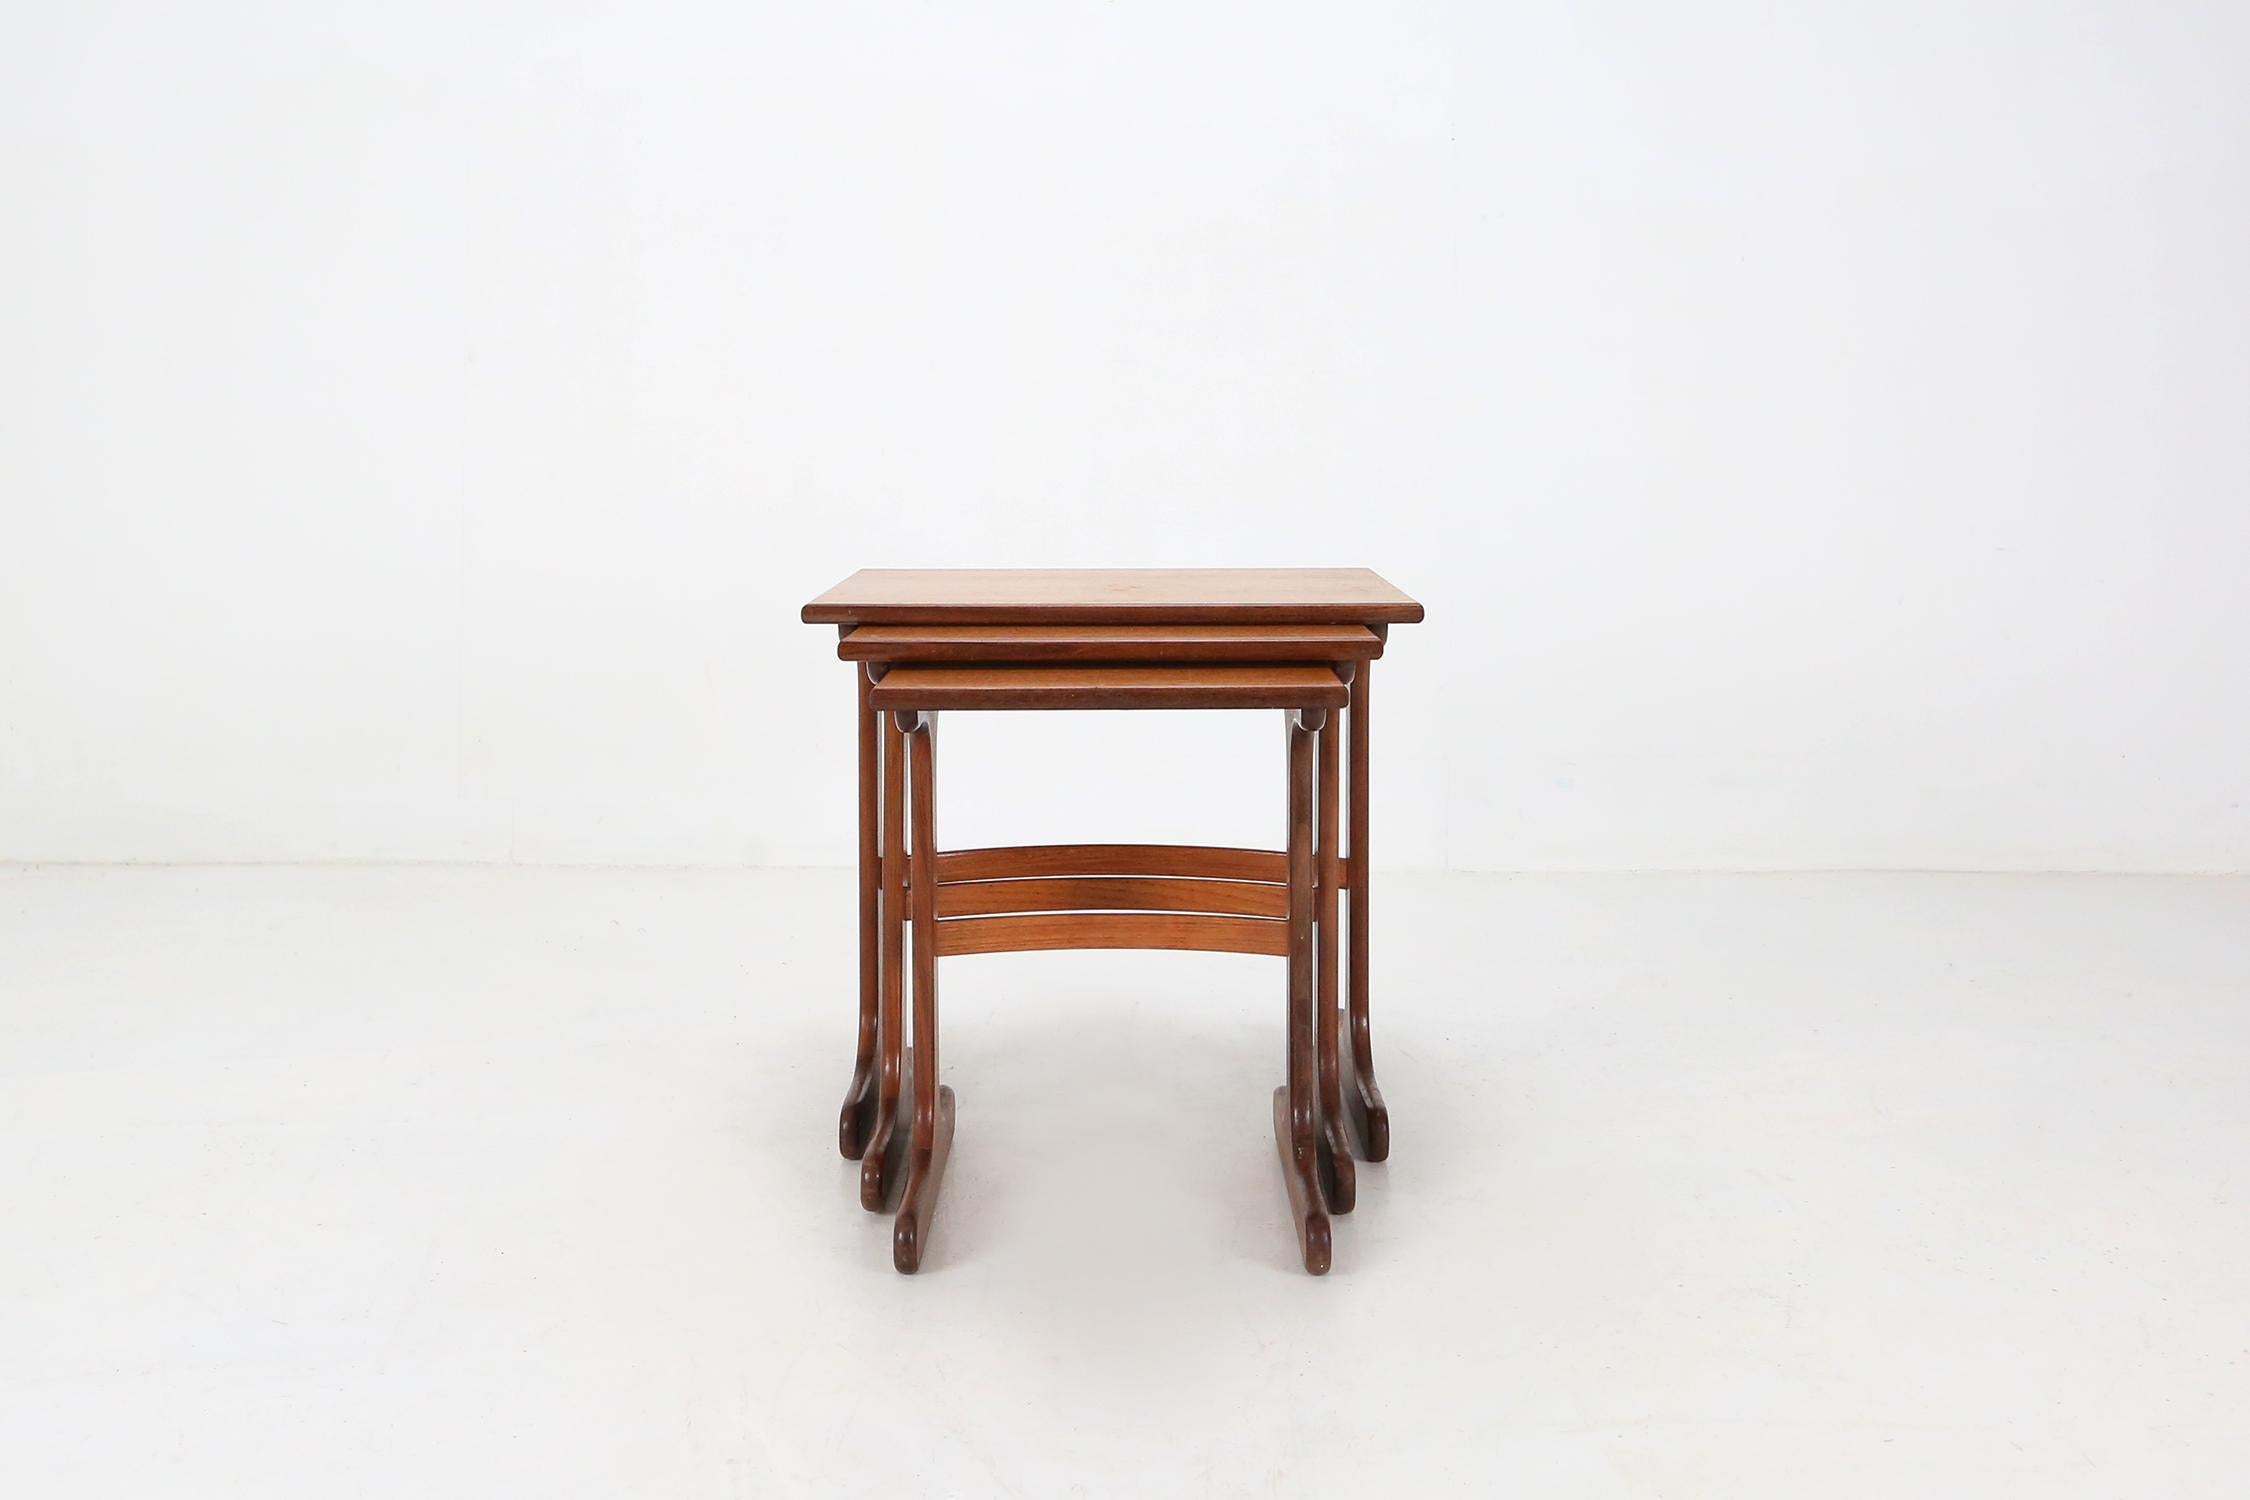 These nesting tables are made of teak veneer and sit on solid teak legs. This elegent set are easy to store as they fit under each other and are very useful.
Some small user damage on the table top.